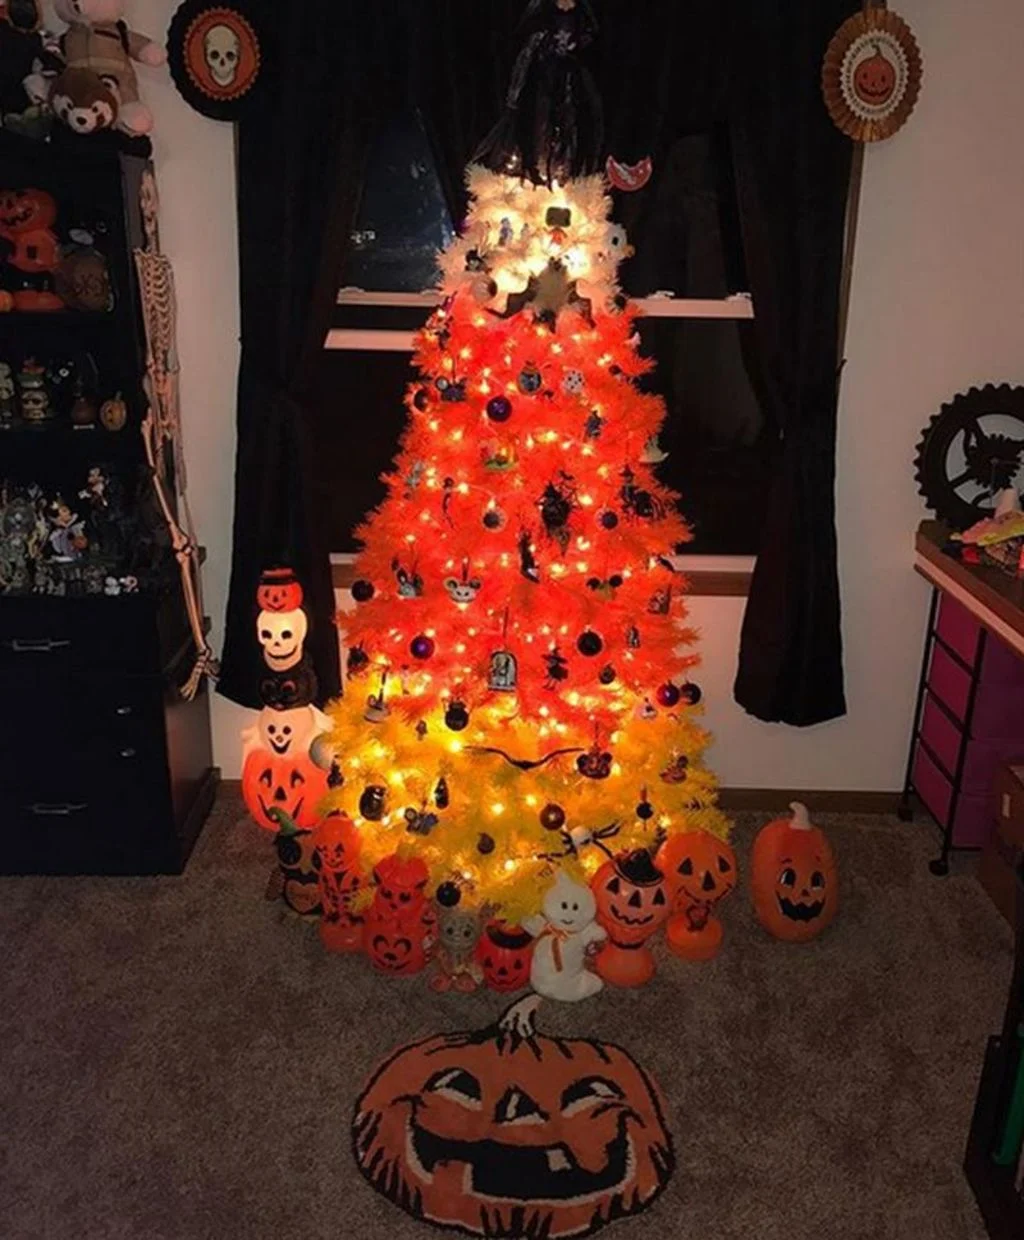 A decorated halloween tree in a living room
